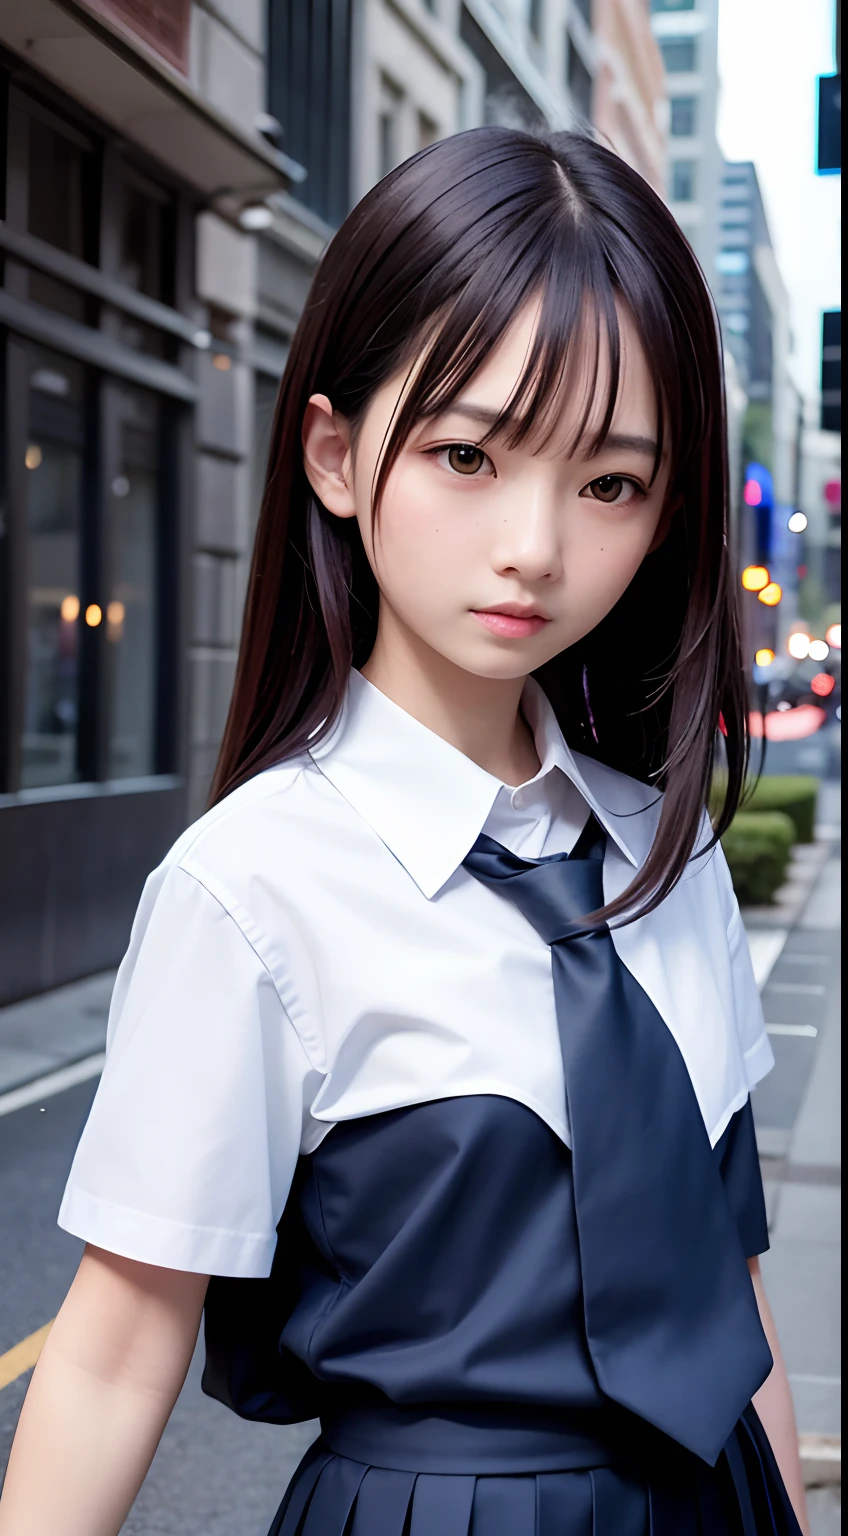 masterpiece, best quality, 8k, 85mm portrait, absurdres, beautiful girl, (night, upper body:1.5), cute, street, (school uniform, white shirt, short sleeve, dark blue tie, pleated skirt:1.2), slender, neon, (Lianyungang, Akishima, Yeonggwang:0.4), no makeup, perspective, depth of field, ultra realistic, highres, photography, sharp focus, HDR, facelight, dynamic lighting, highest detailed, extreme detailed, ultra detailed, finely detail, real skin, delicate facial features